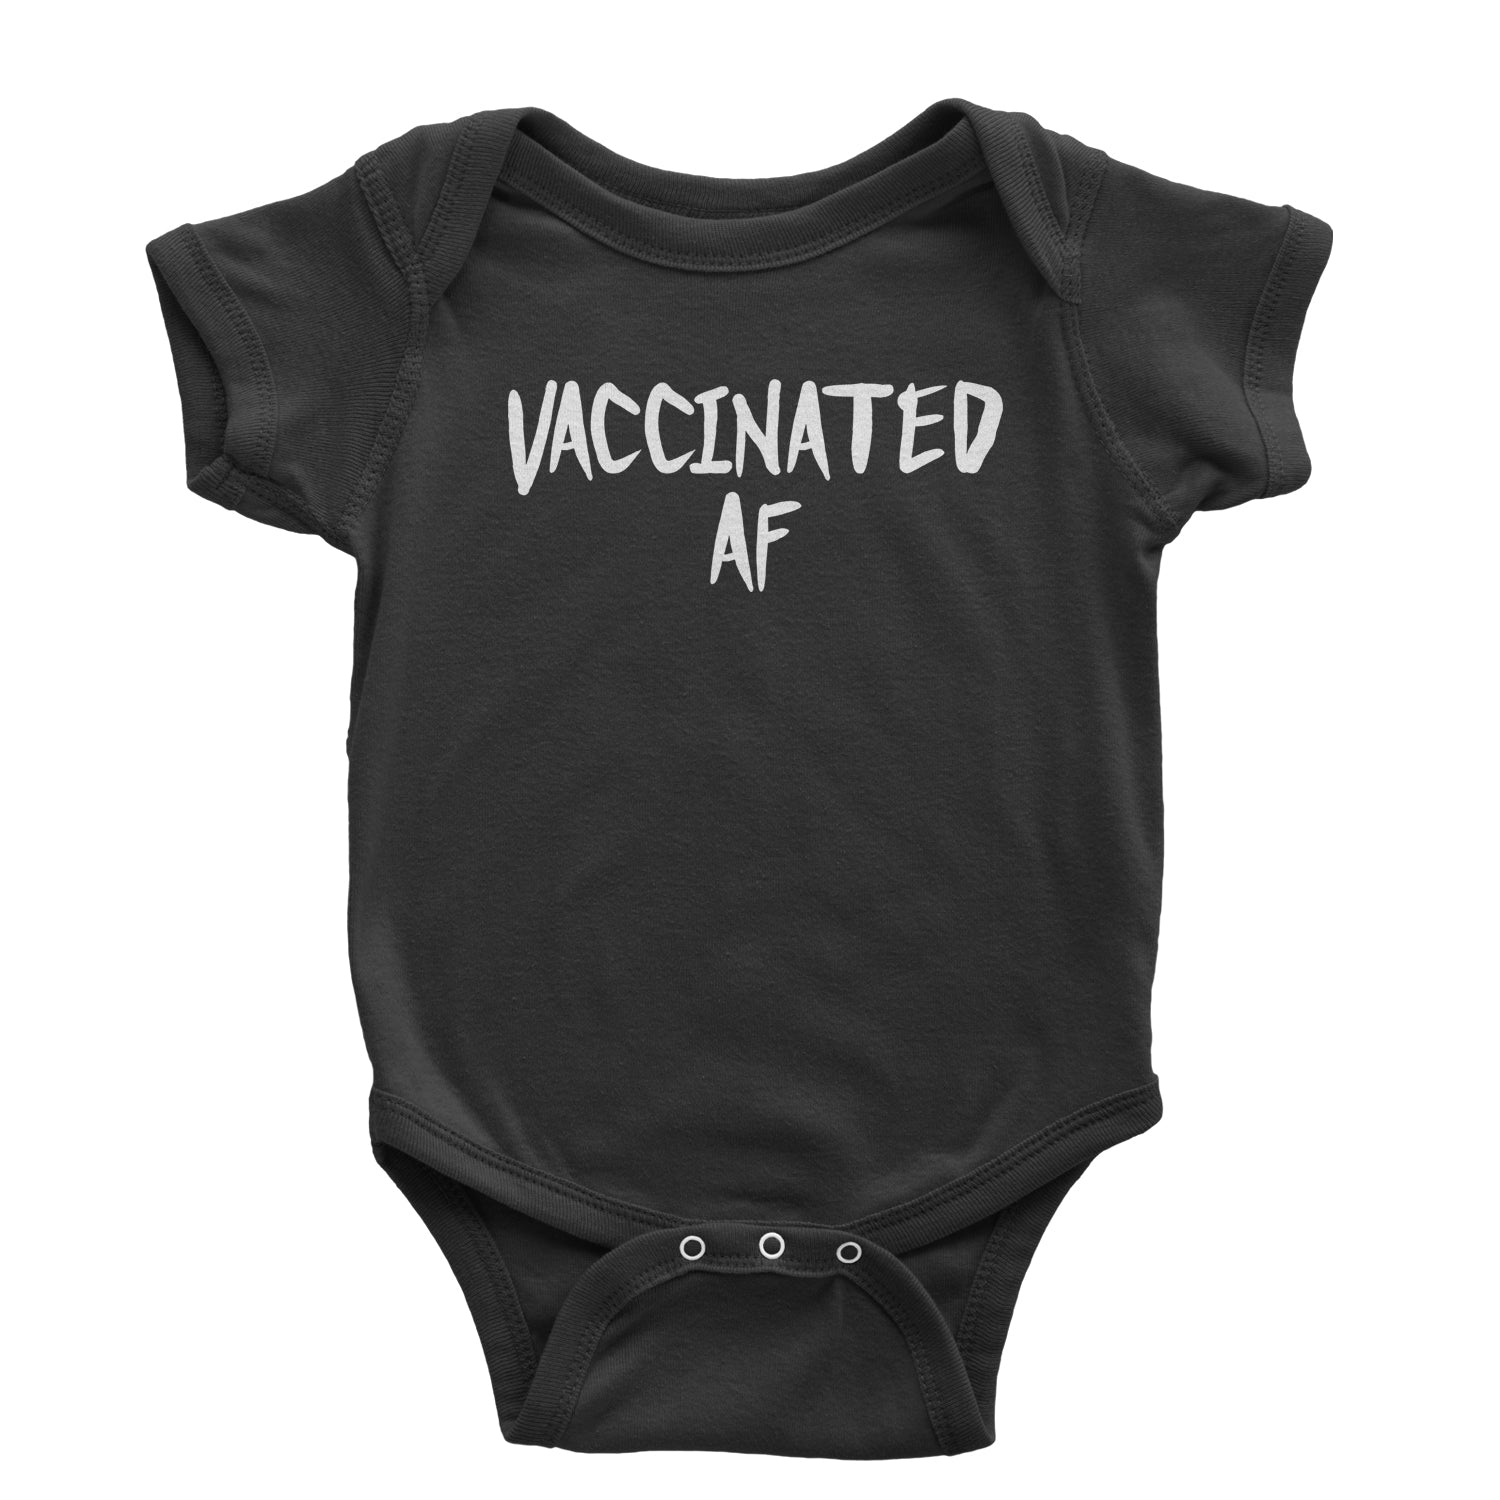 Vaccinated AF Pro Vaccine Funny Vaccination Health Infant One-Piece Romper Bodysuit moderna, pfizer, vaccine, vax, vaxx by Expression Tees